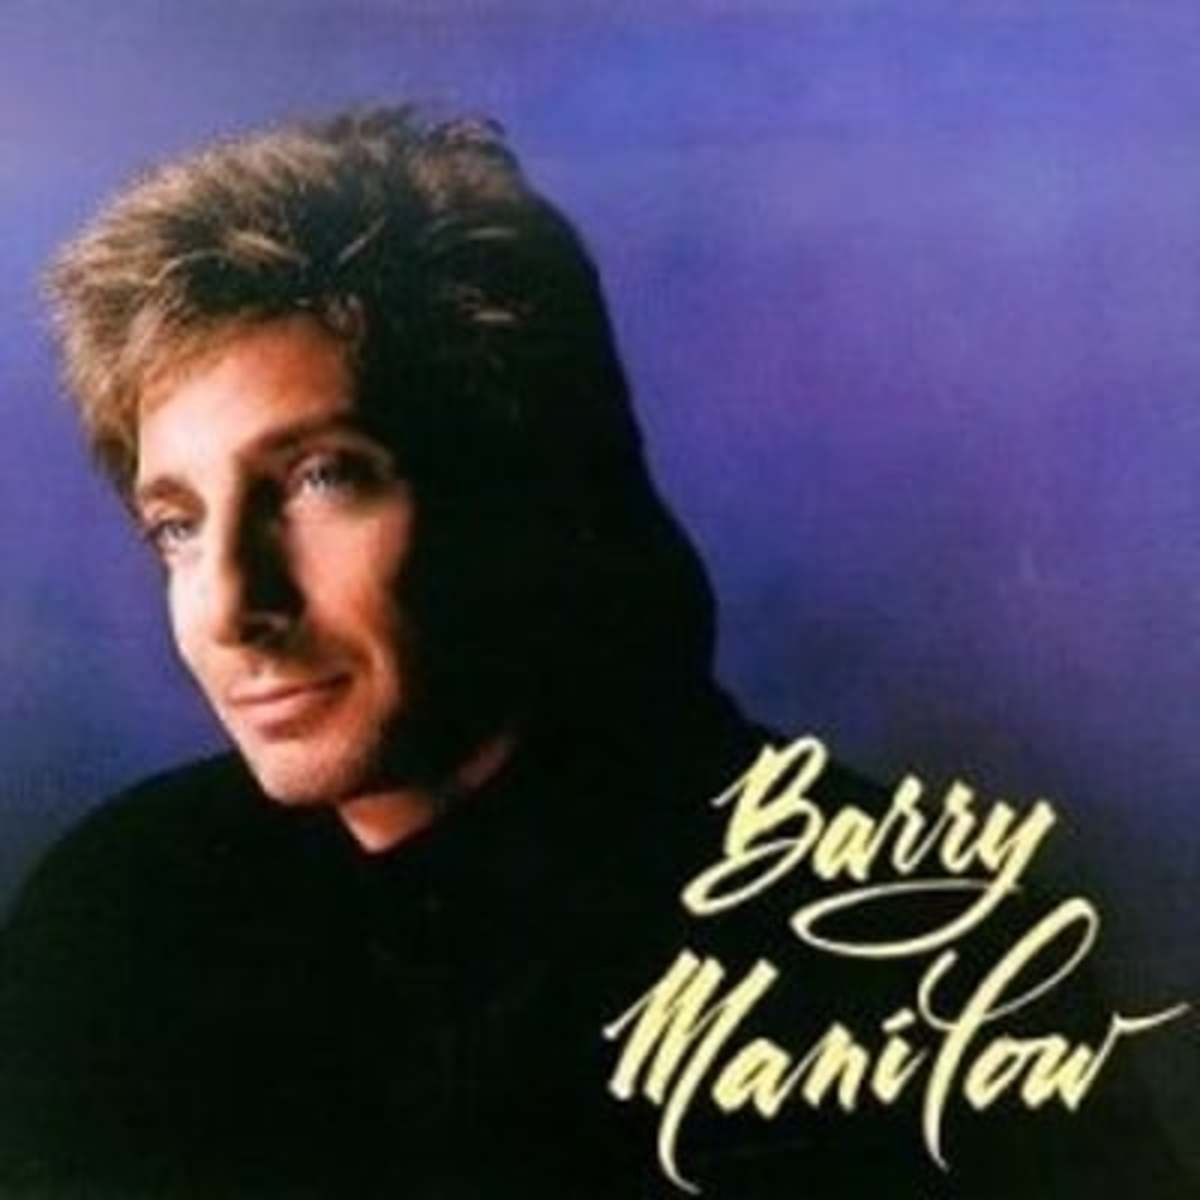 My Favorite Song of Barry Manilow